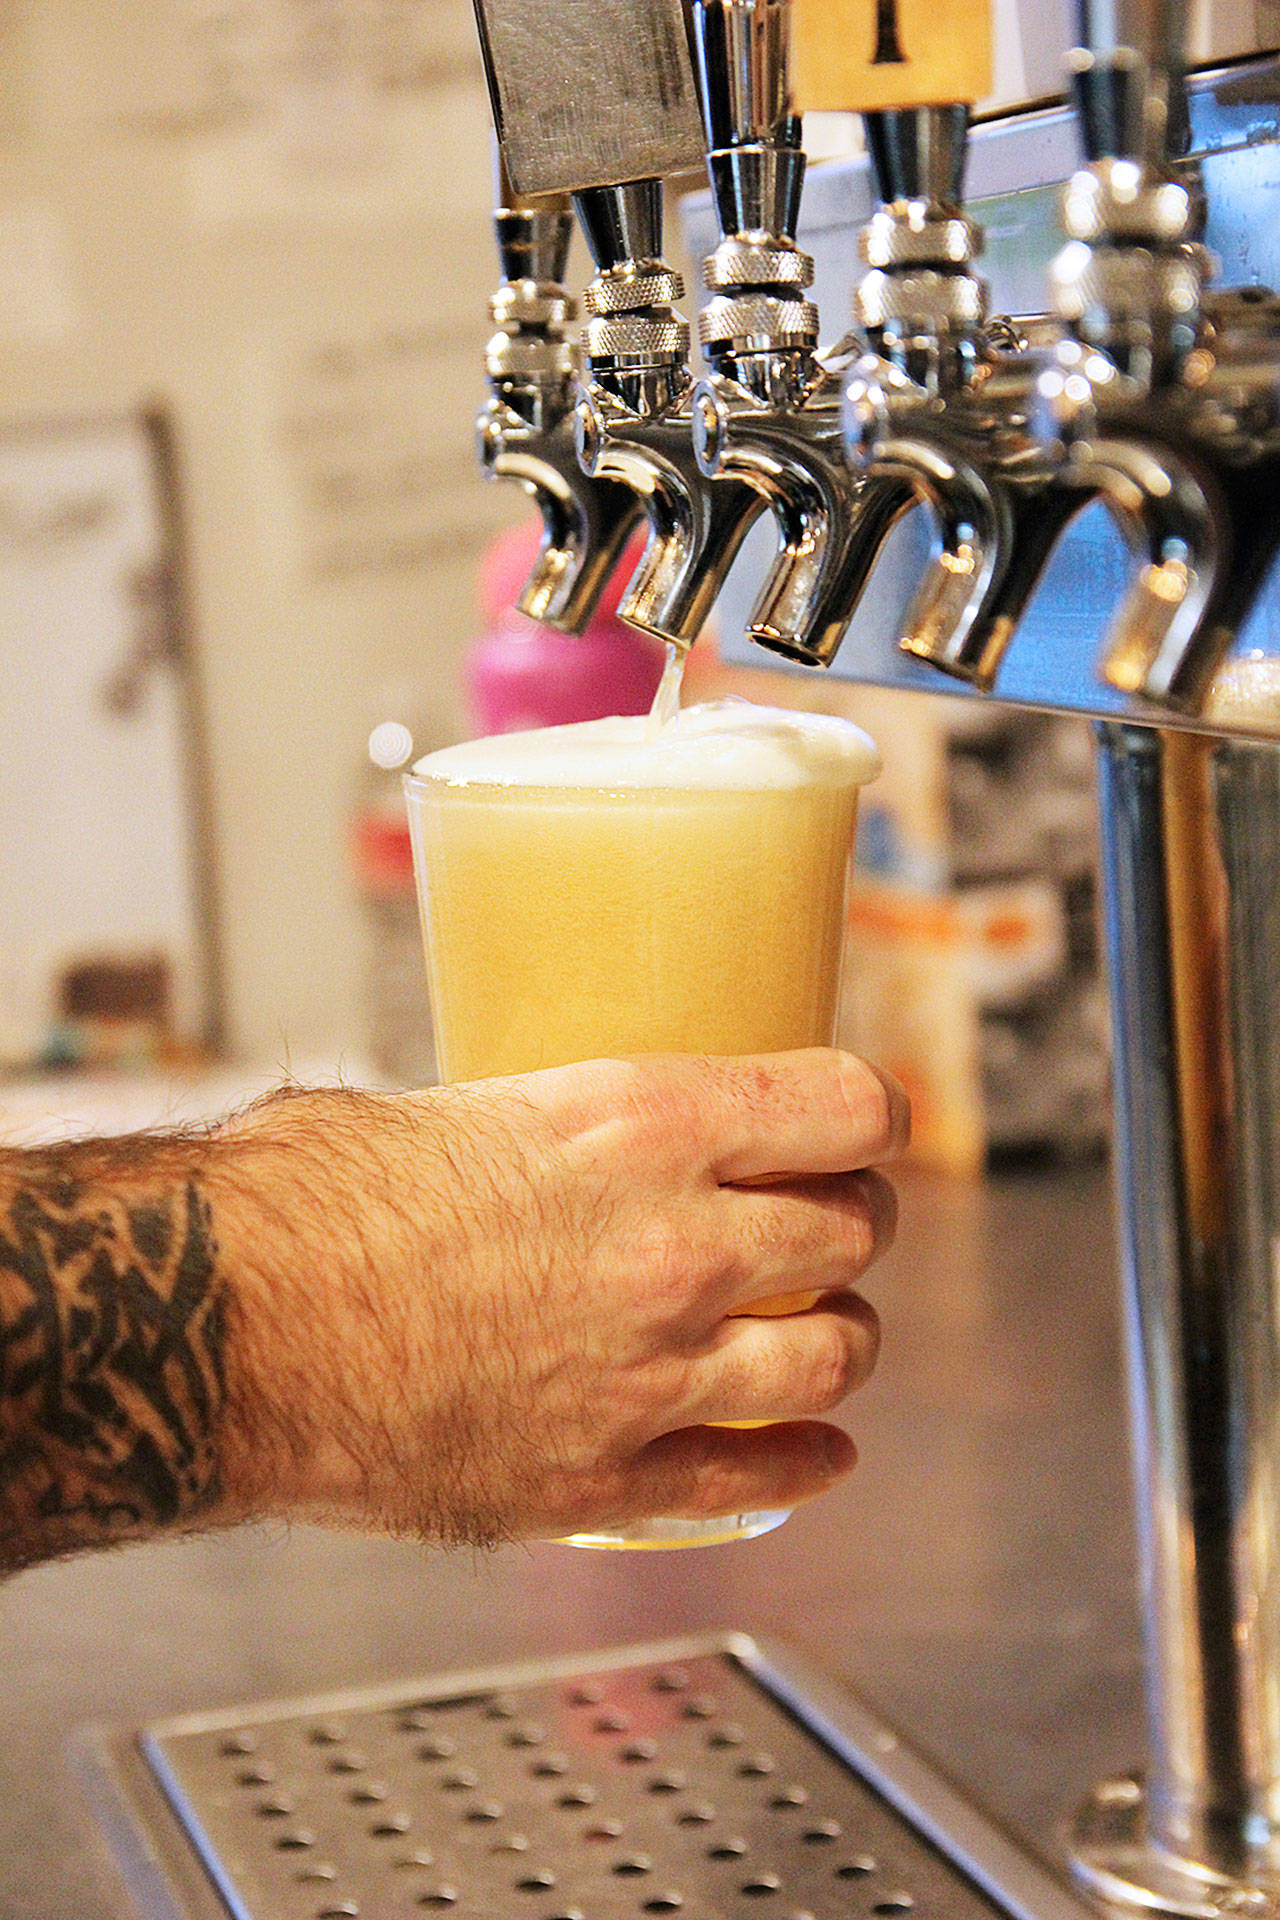 JJ Marti fills up a beer at Rock Island Coffee, which sells much more than just coffee. Photo by Laura Guido/Whidbey News-Times